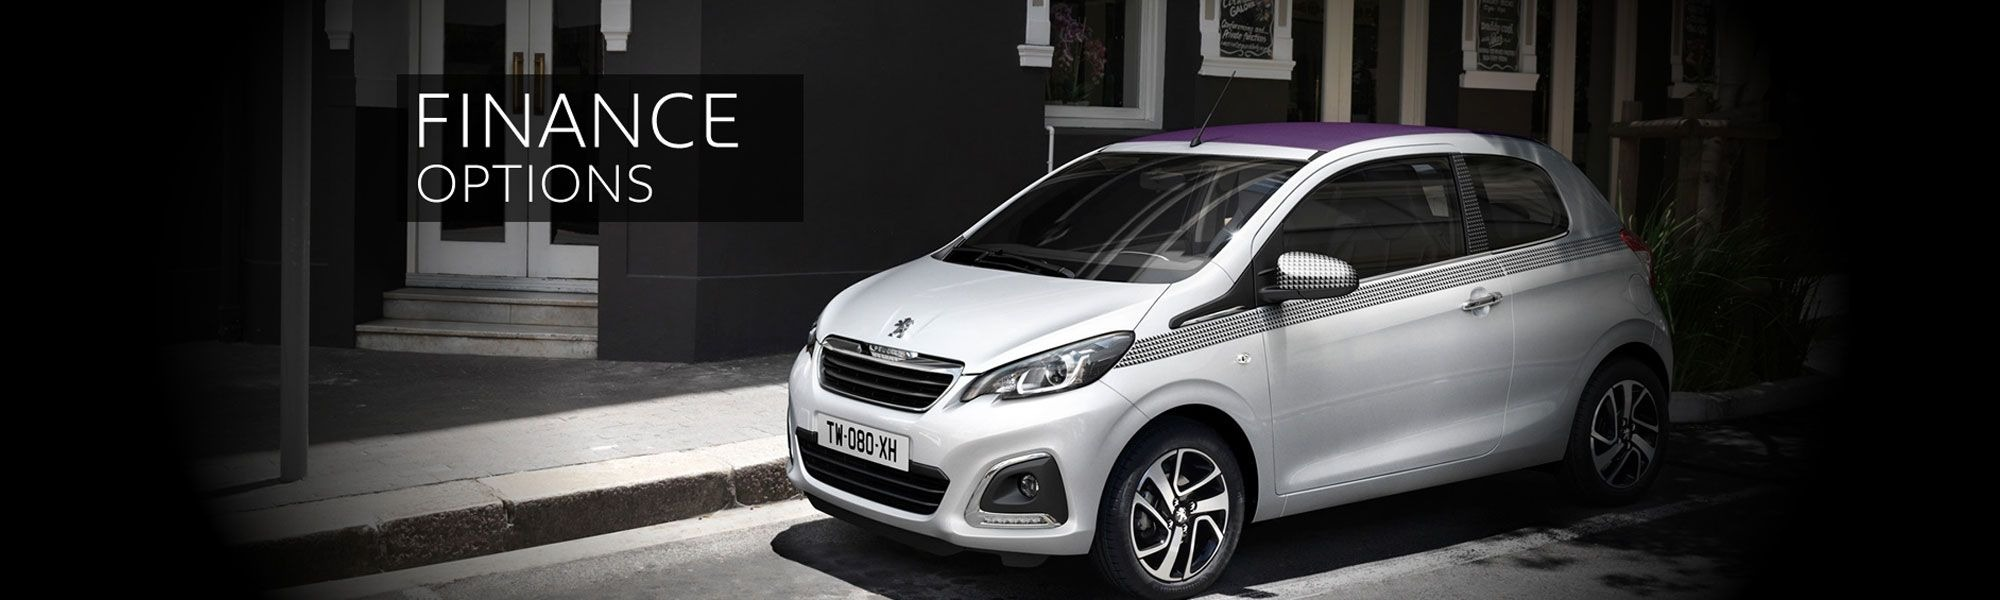 Peugeot Finance at Keith Price Garages